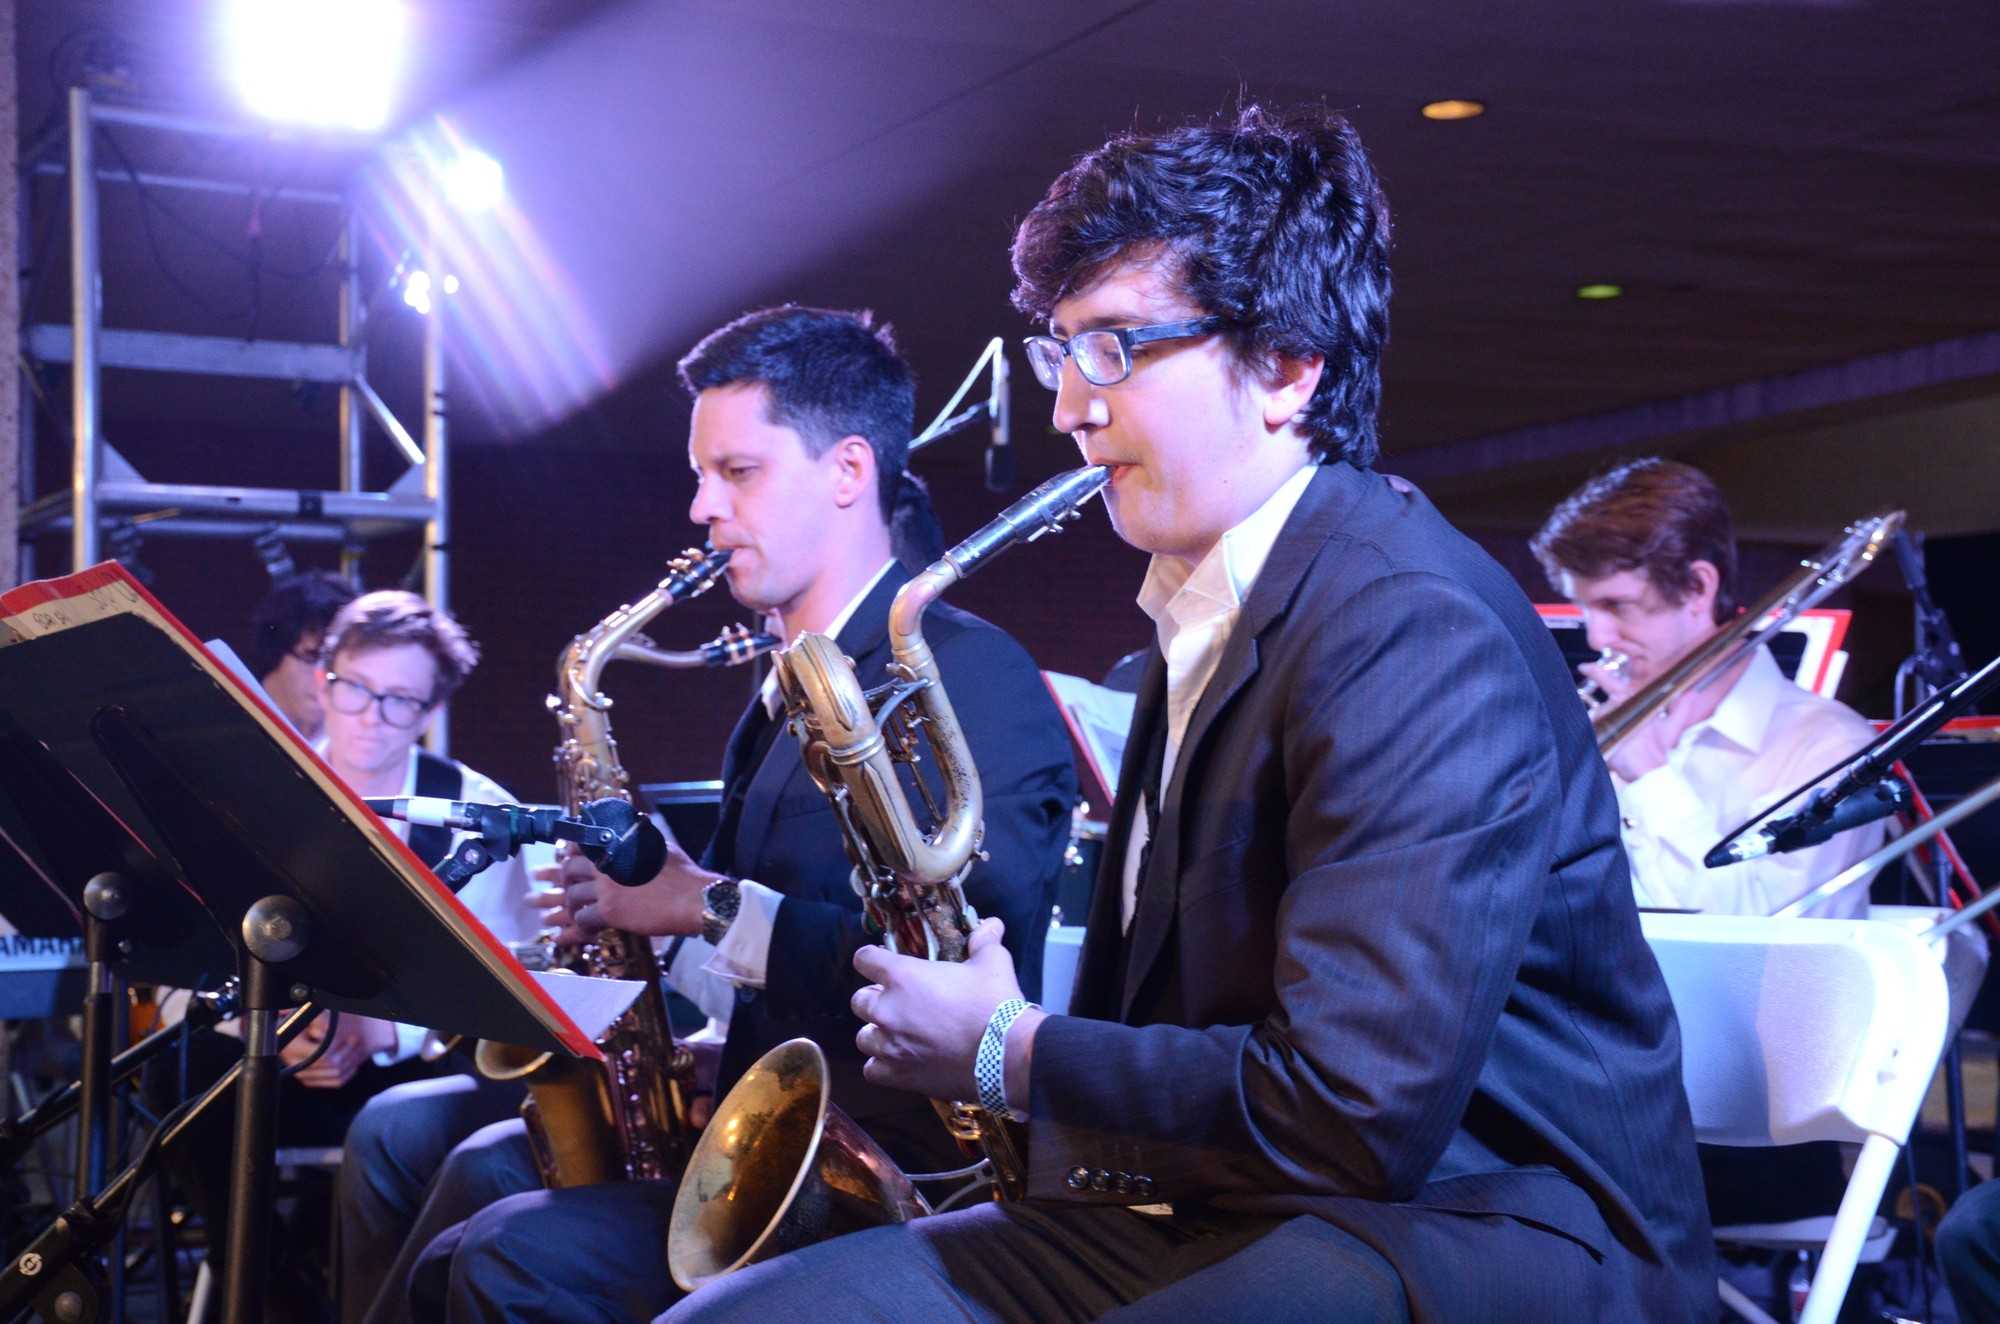 Members of the CSUN Jazz Band perform for the crowd during the College of Humanities and College of Health and Human Development commencement ceremony on May 23. Photo credit: Erik Luna